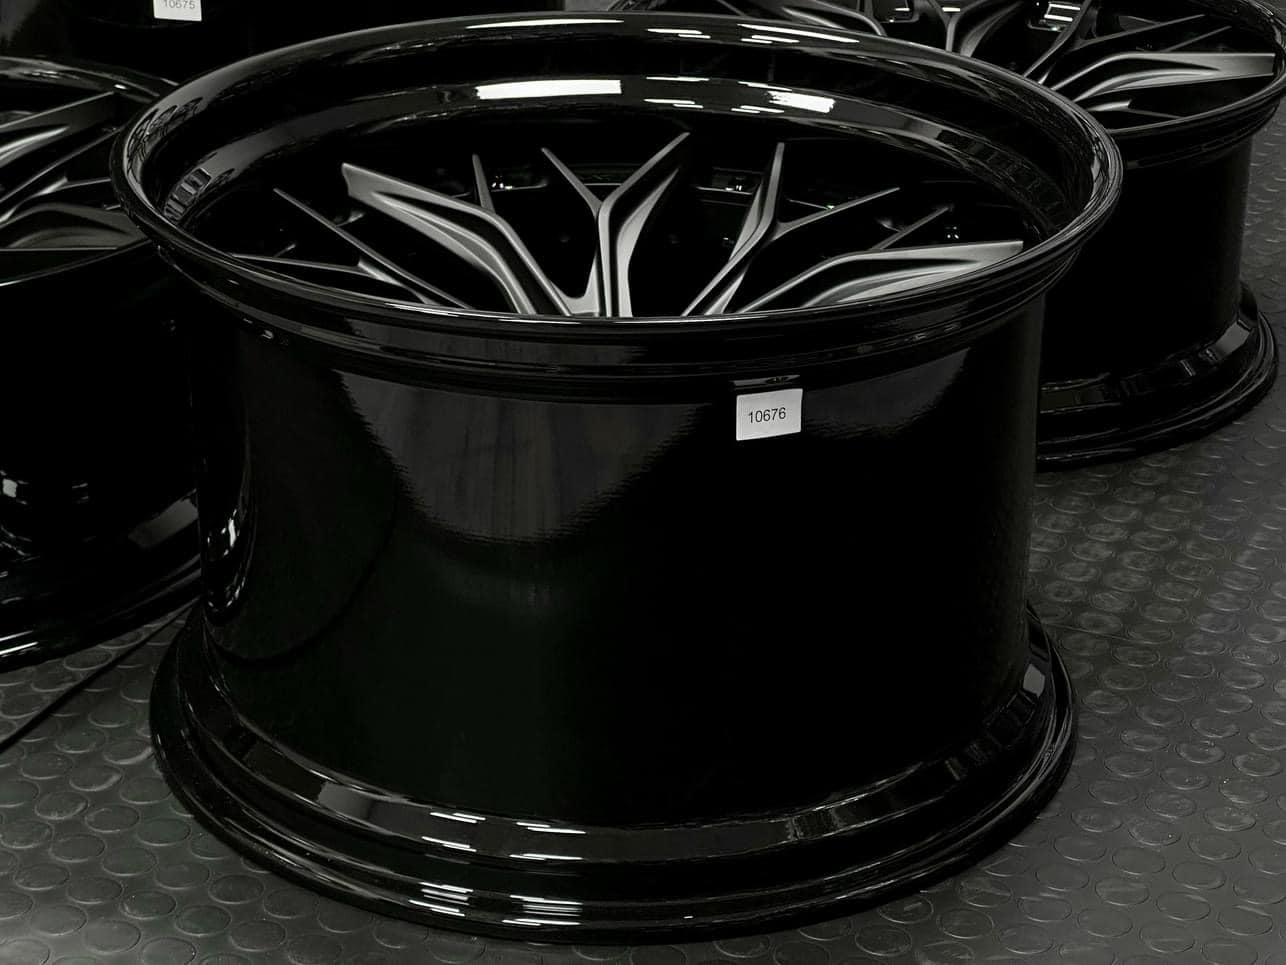 S650 Mustang New** NES Forged Wheels by MRR Design 1pc and 2pc 374179893_6862502627137765_5477299365365663352_n